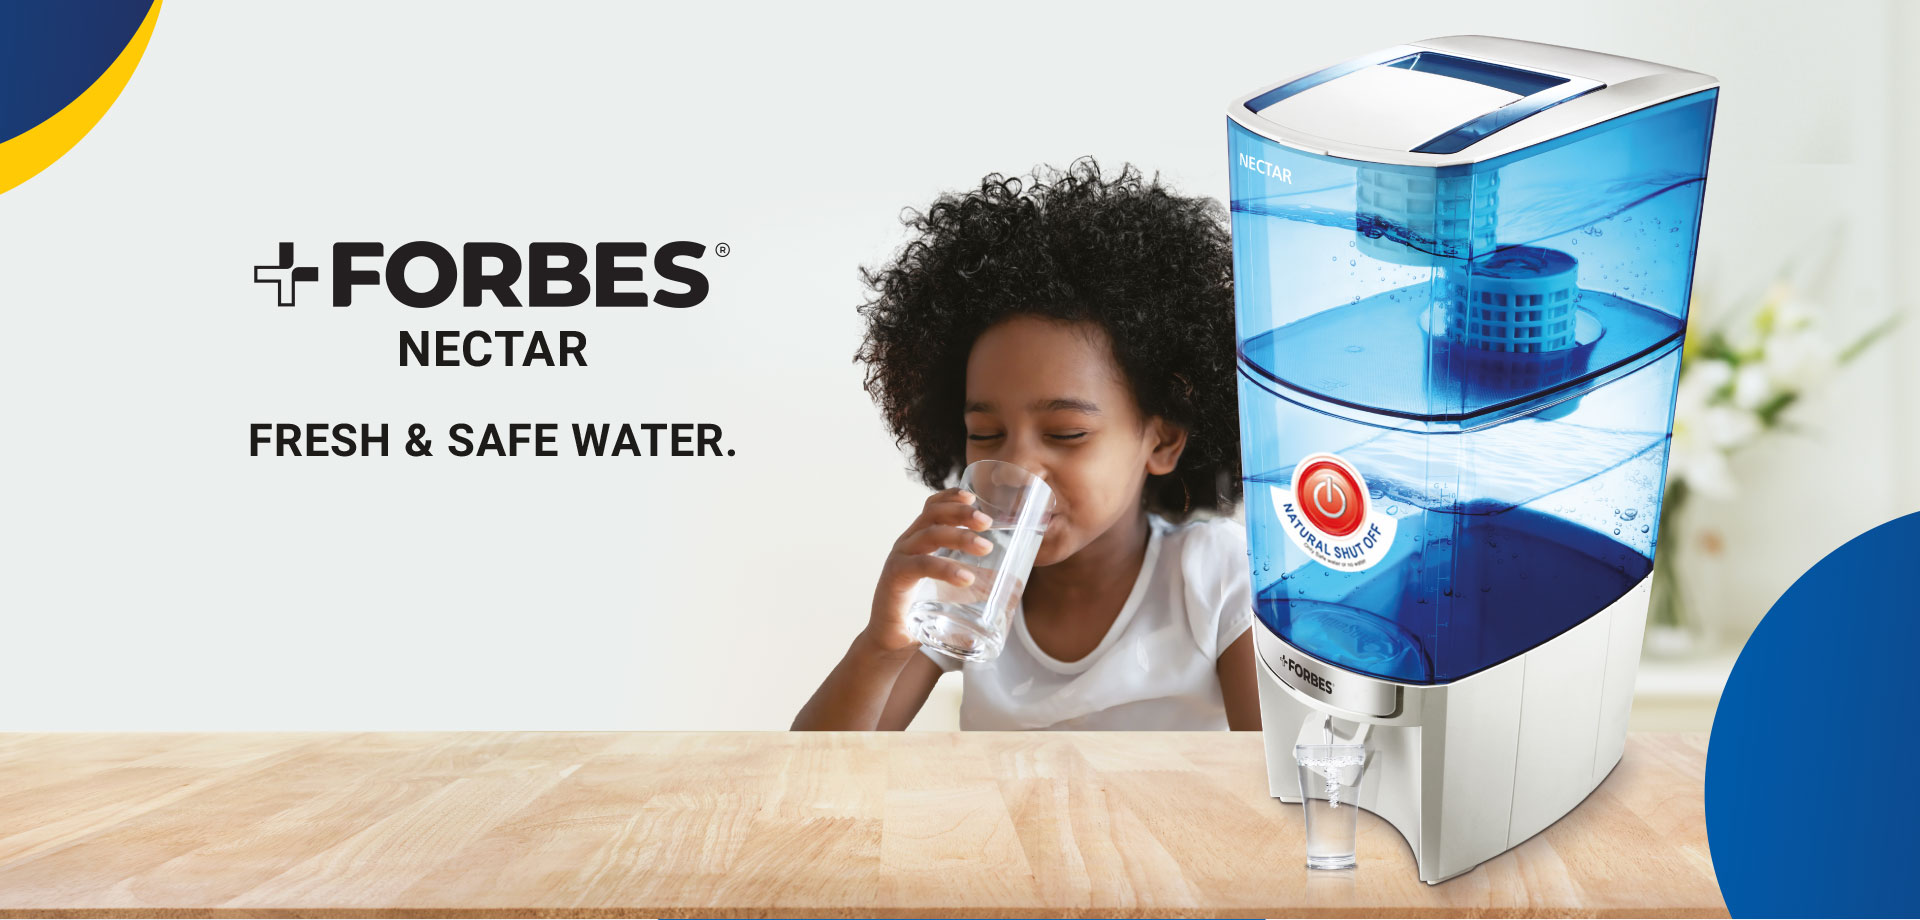 FORBES NECTAR FRESH & SAFE WATER.